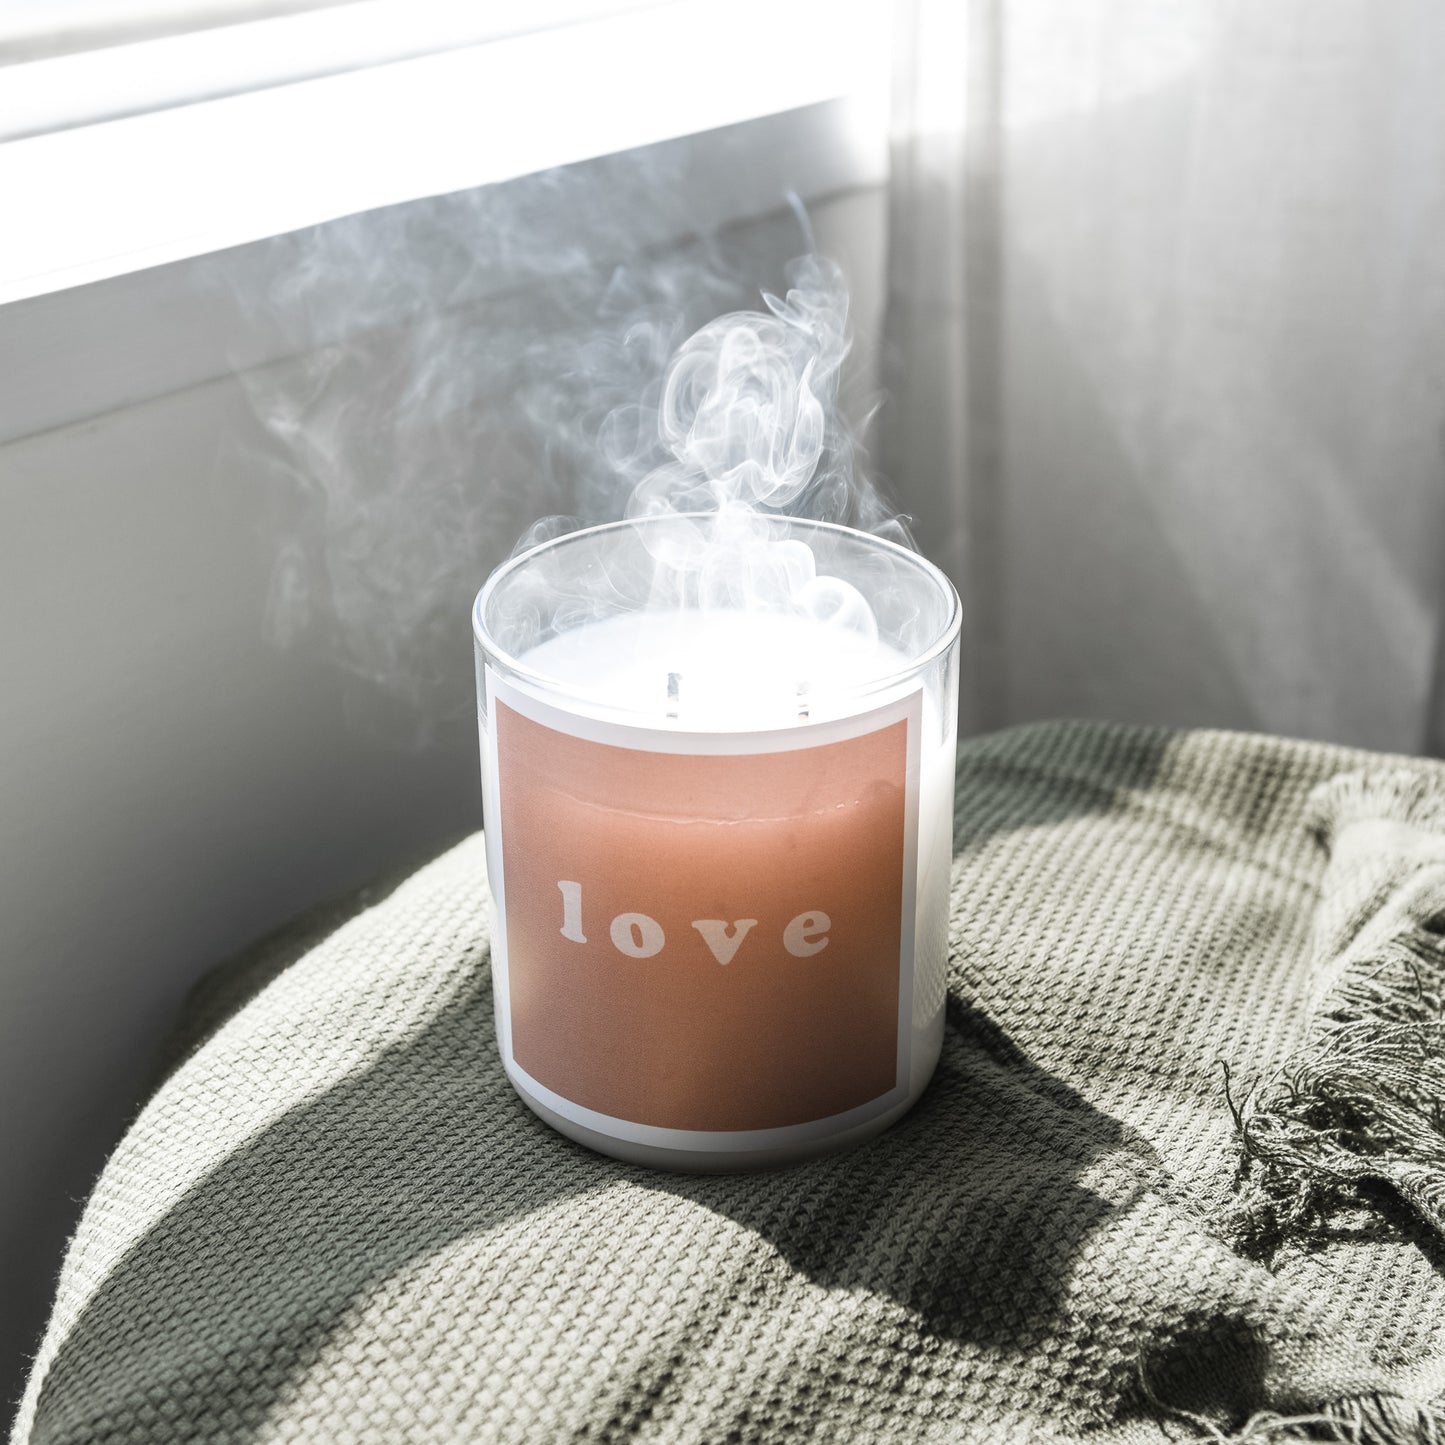 Love (Freedom Collection) Candle